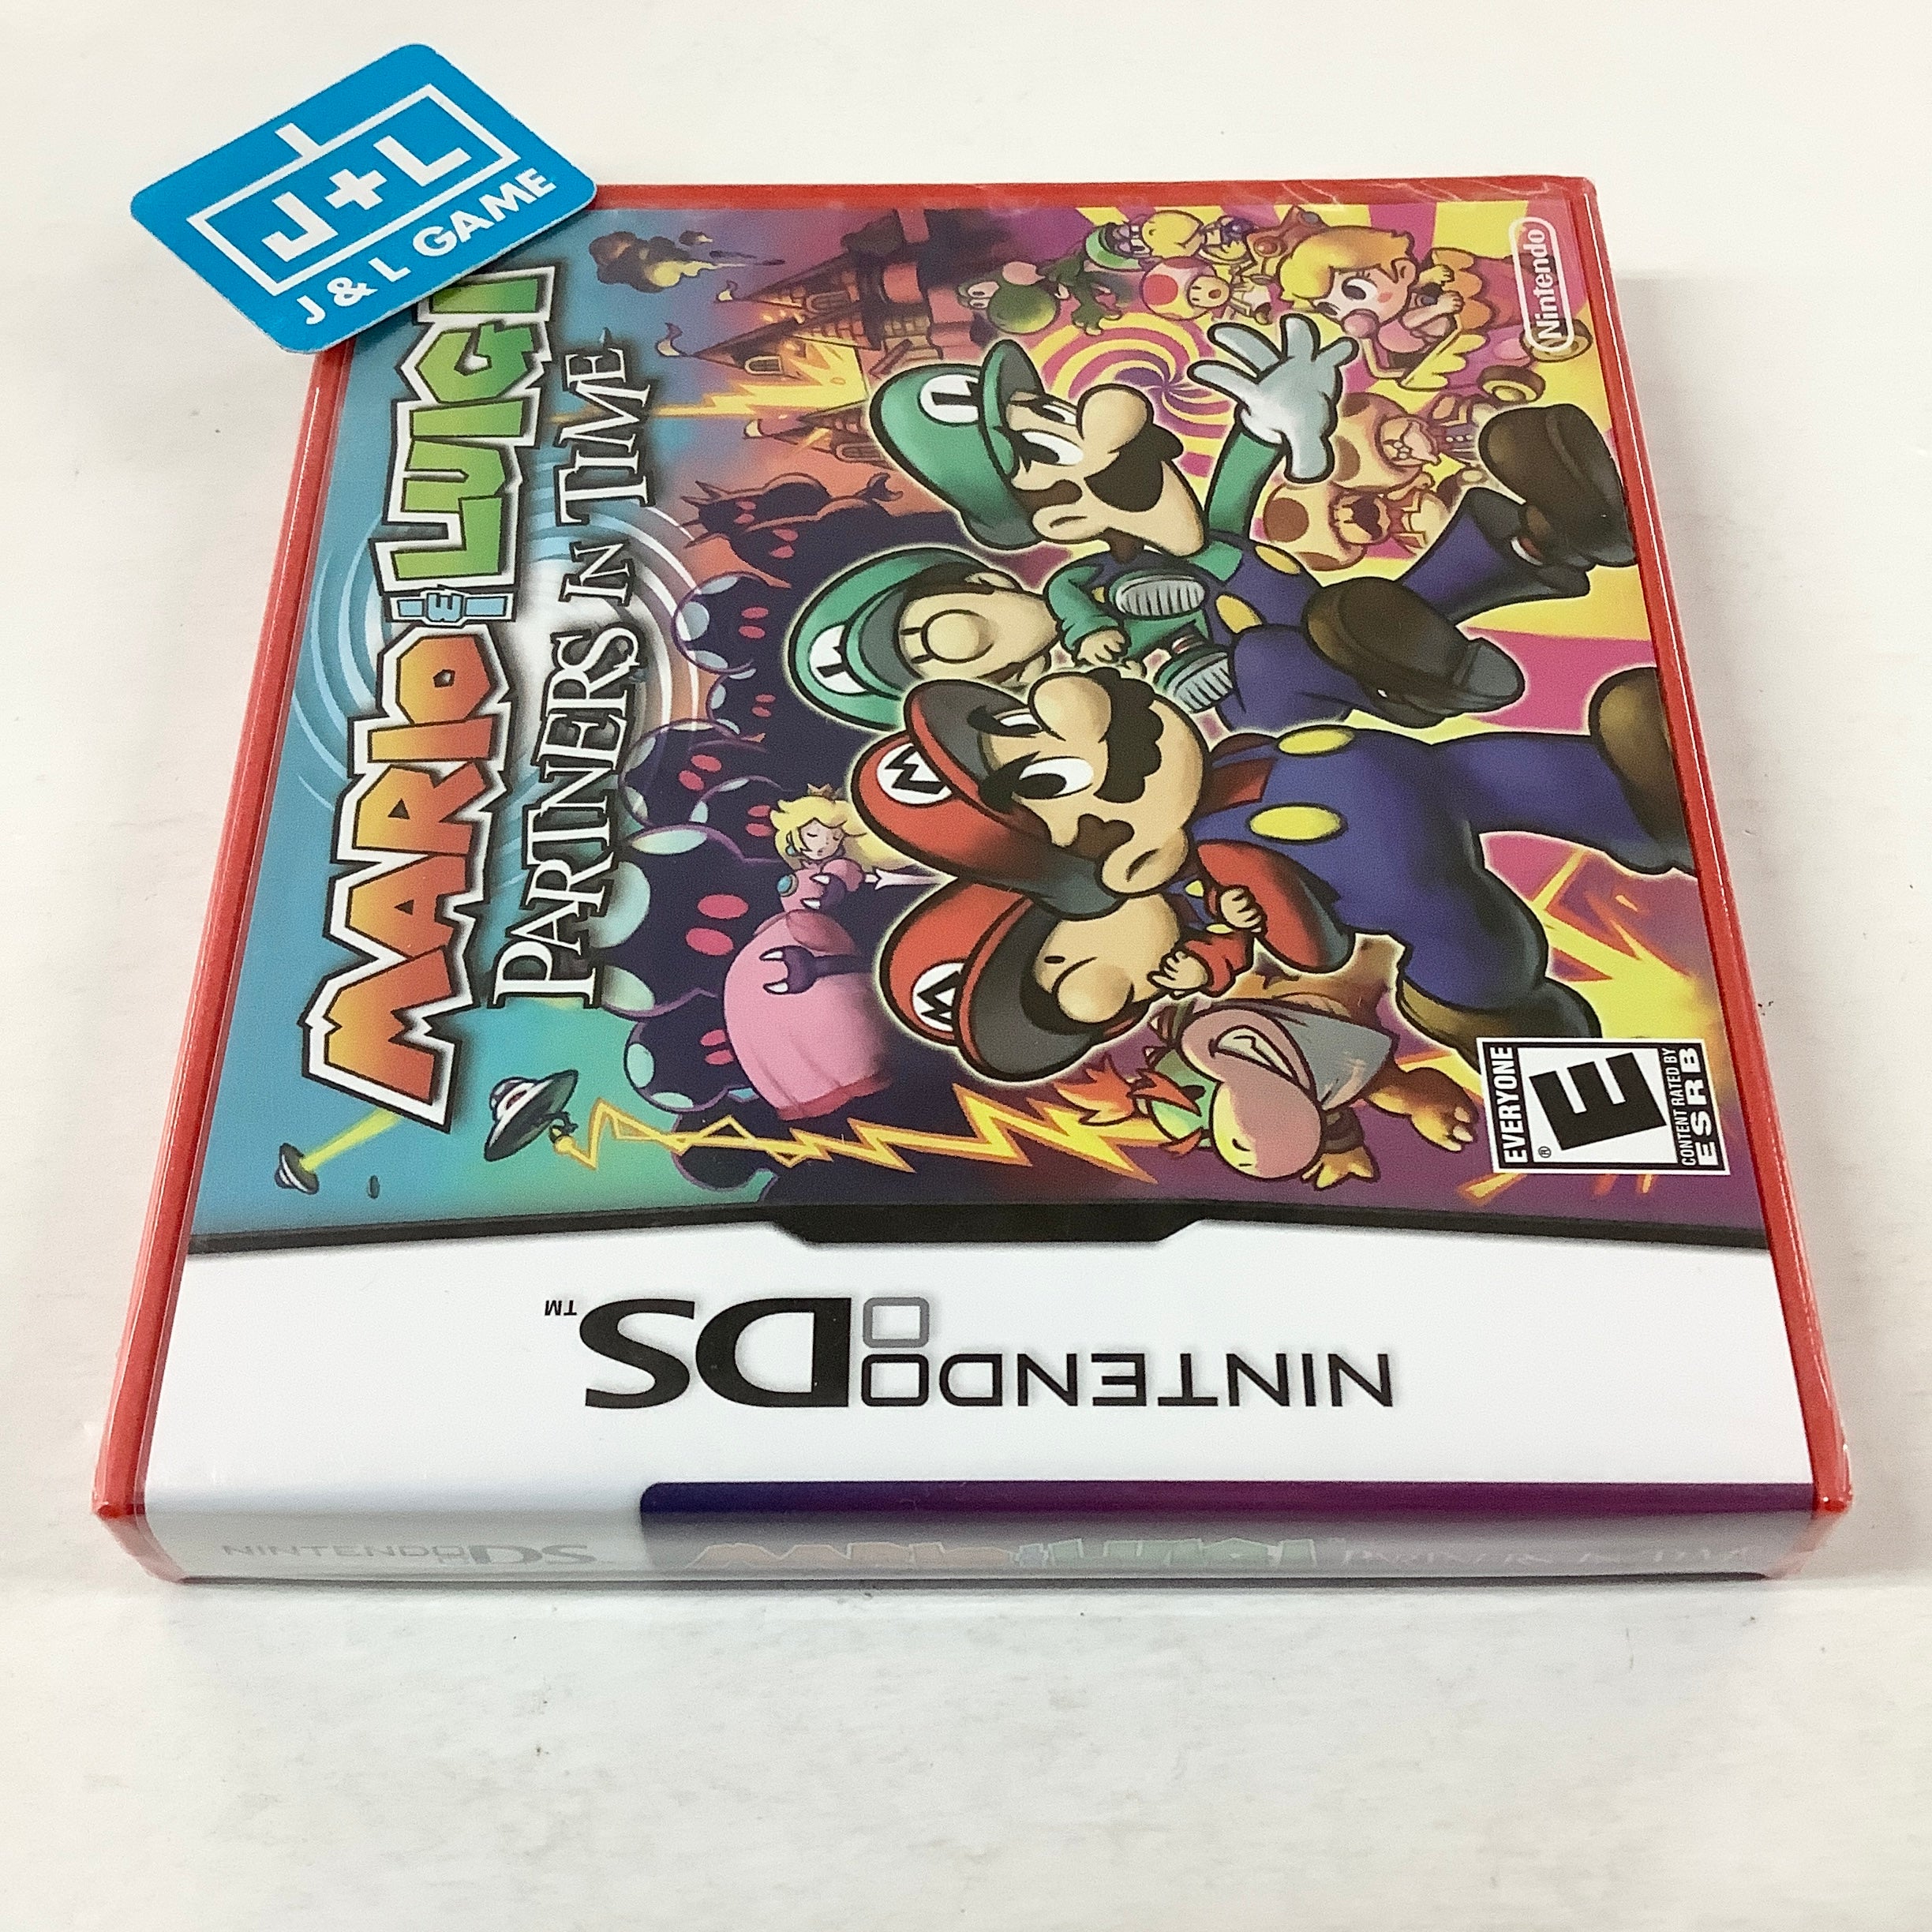 Mario & Luigi: Partners in Time (Red Case) - (NDS) Nintendo DS